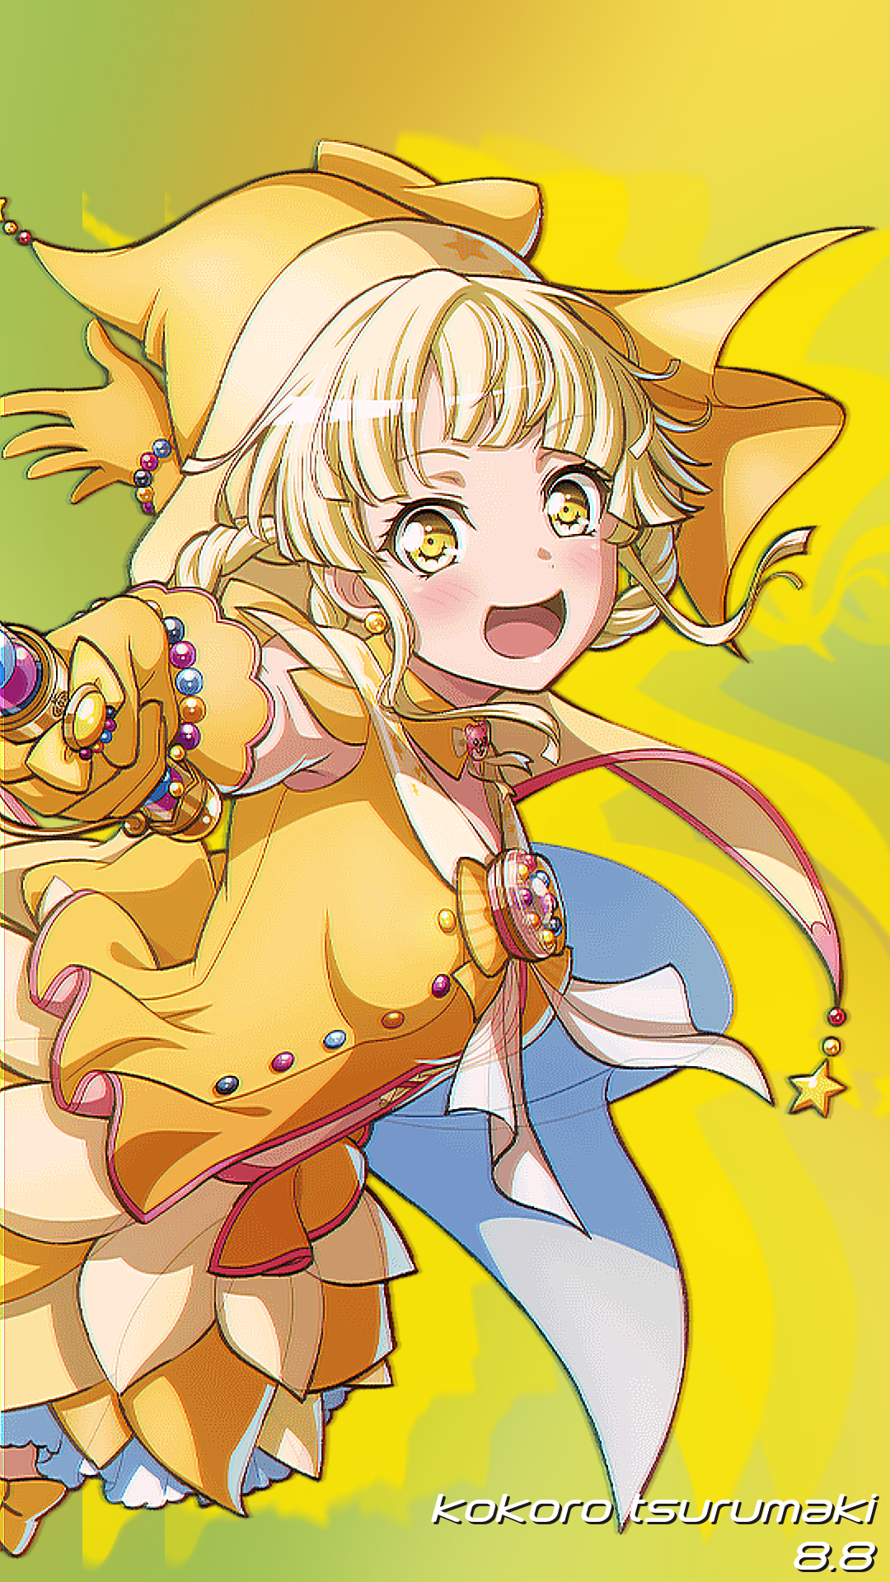 Happy birthday, Kokoro! You're indeed one of the most cheerful girls I know from this franchise, and...